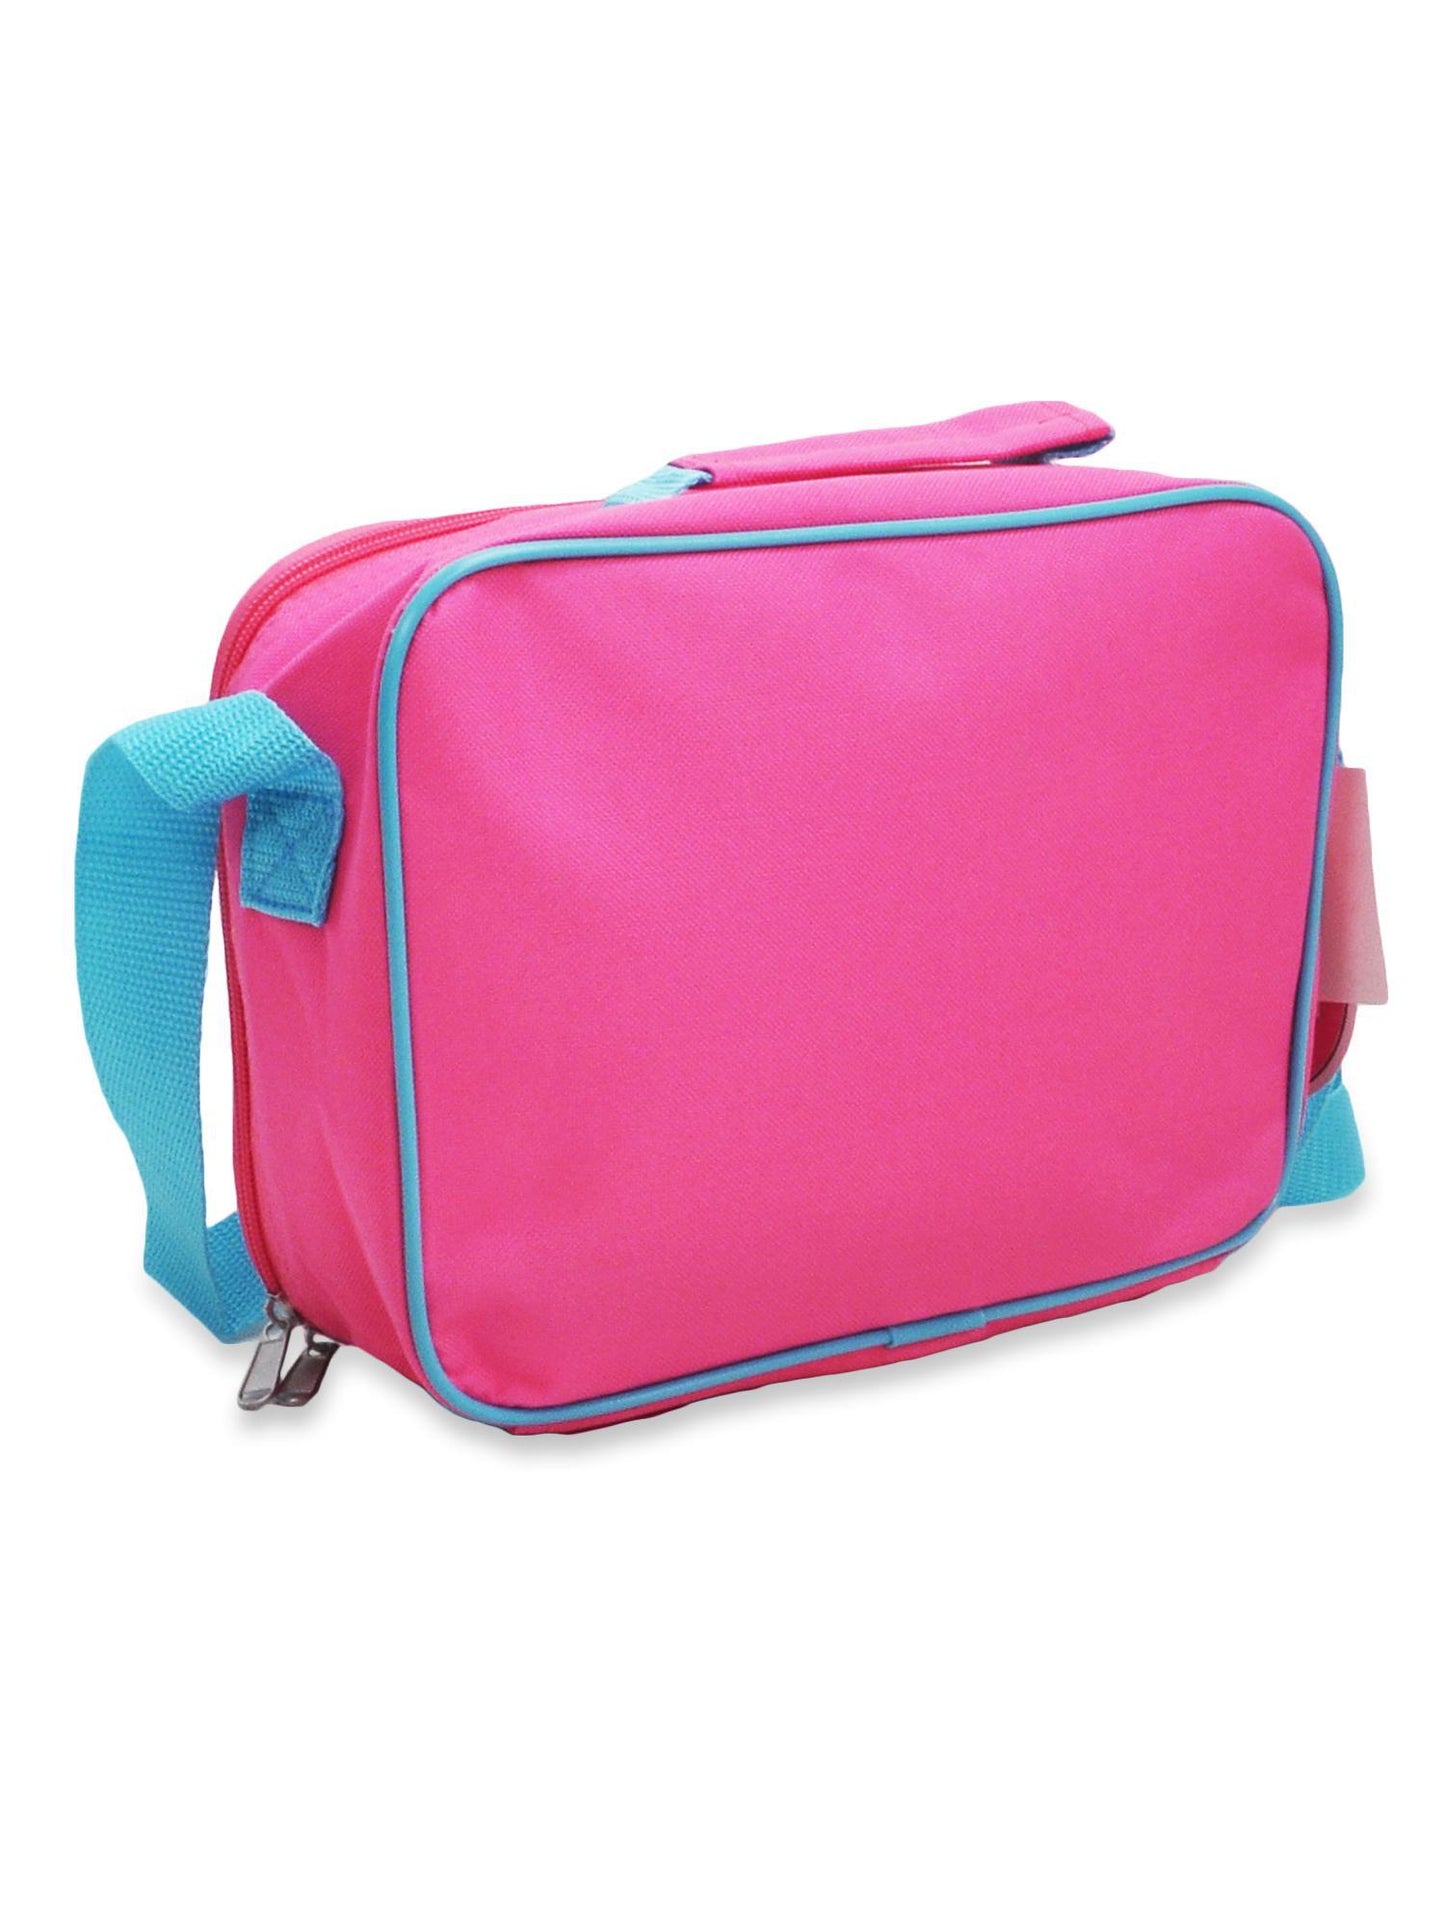 L.O.L Surprise! Insulated Back To School Lunch Bag with Shoulder Strap - Doll Diva, Merbaby and Leading Baby, Pink